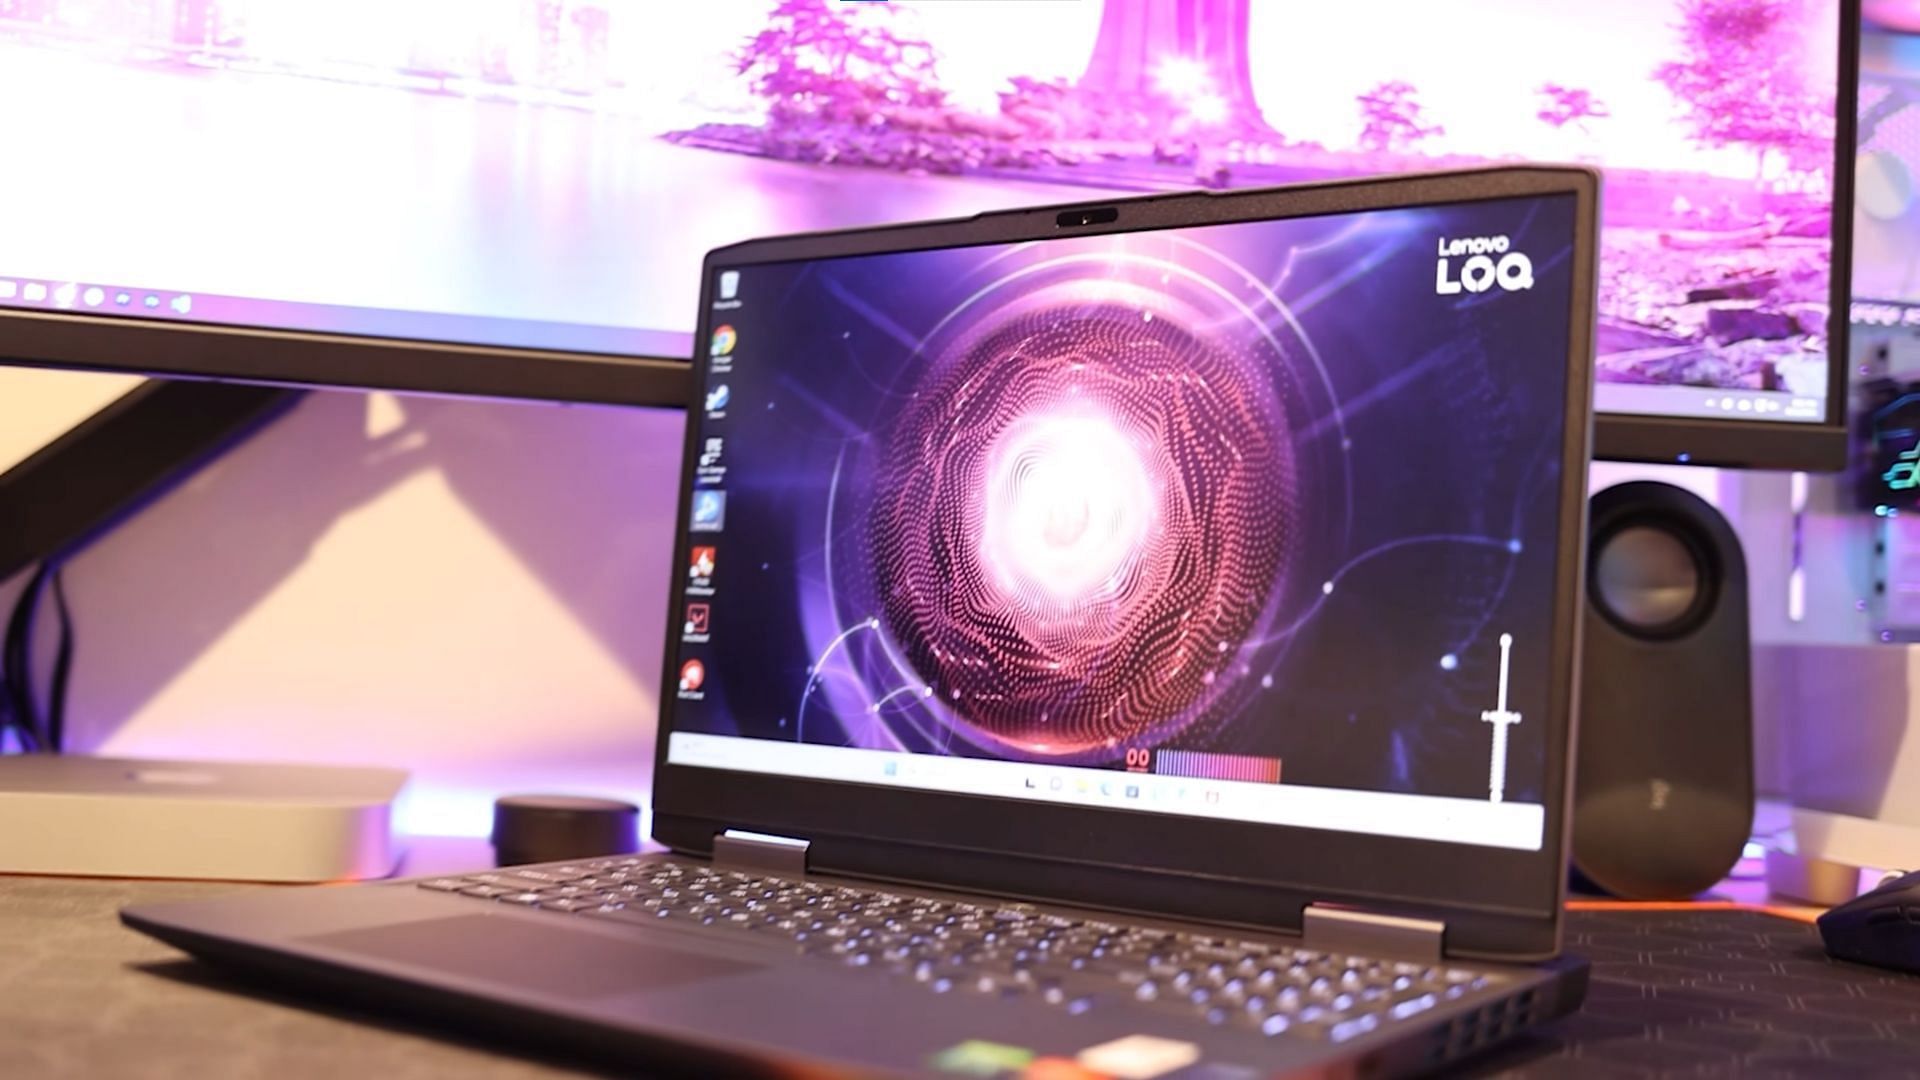 Picture of the Lenovo LOQ gaming laptop